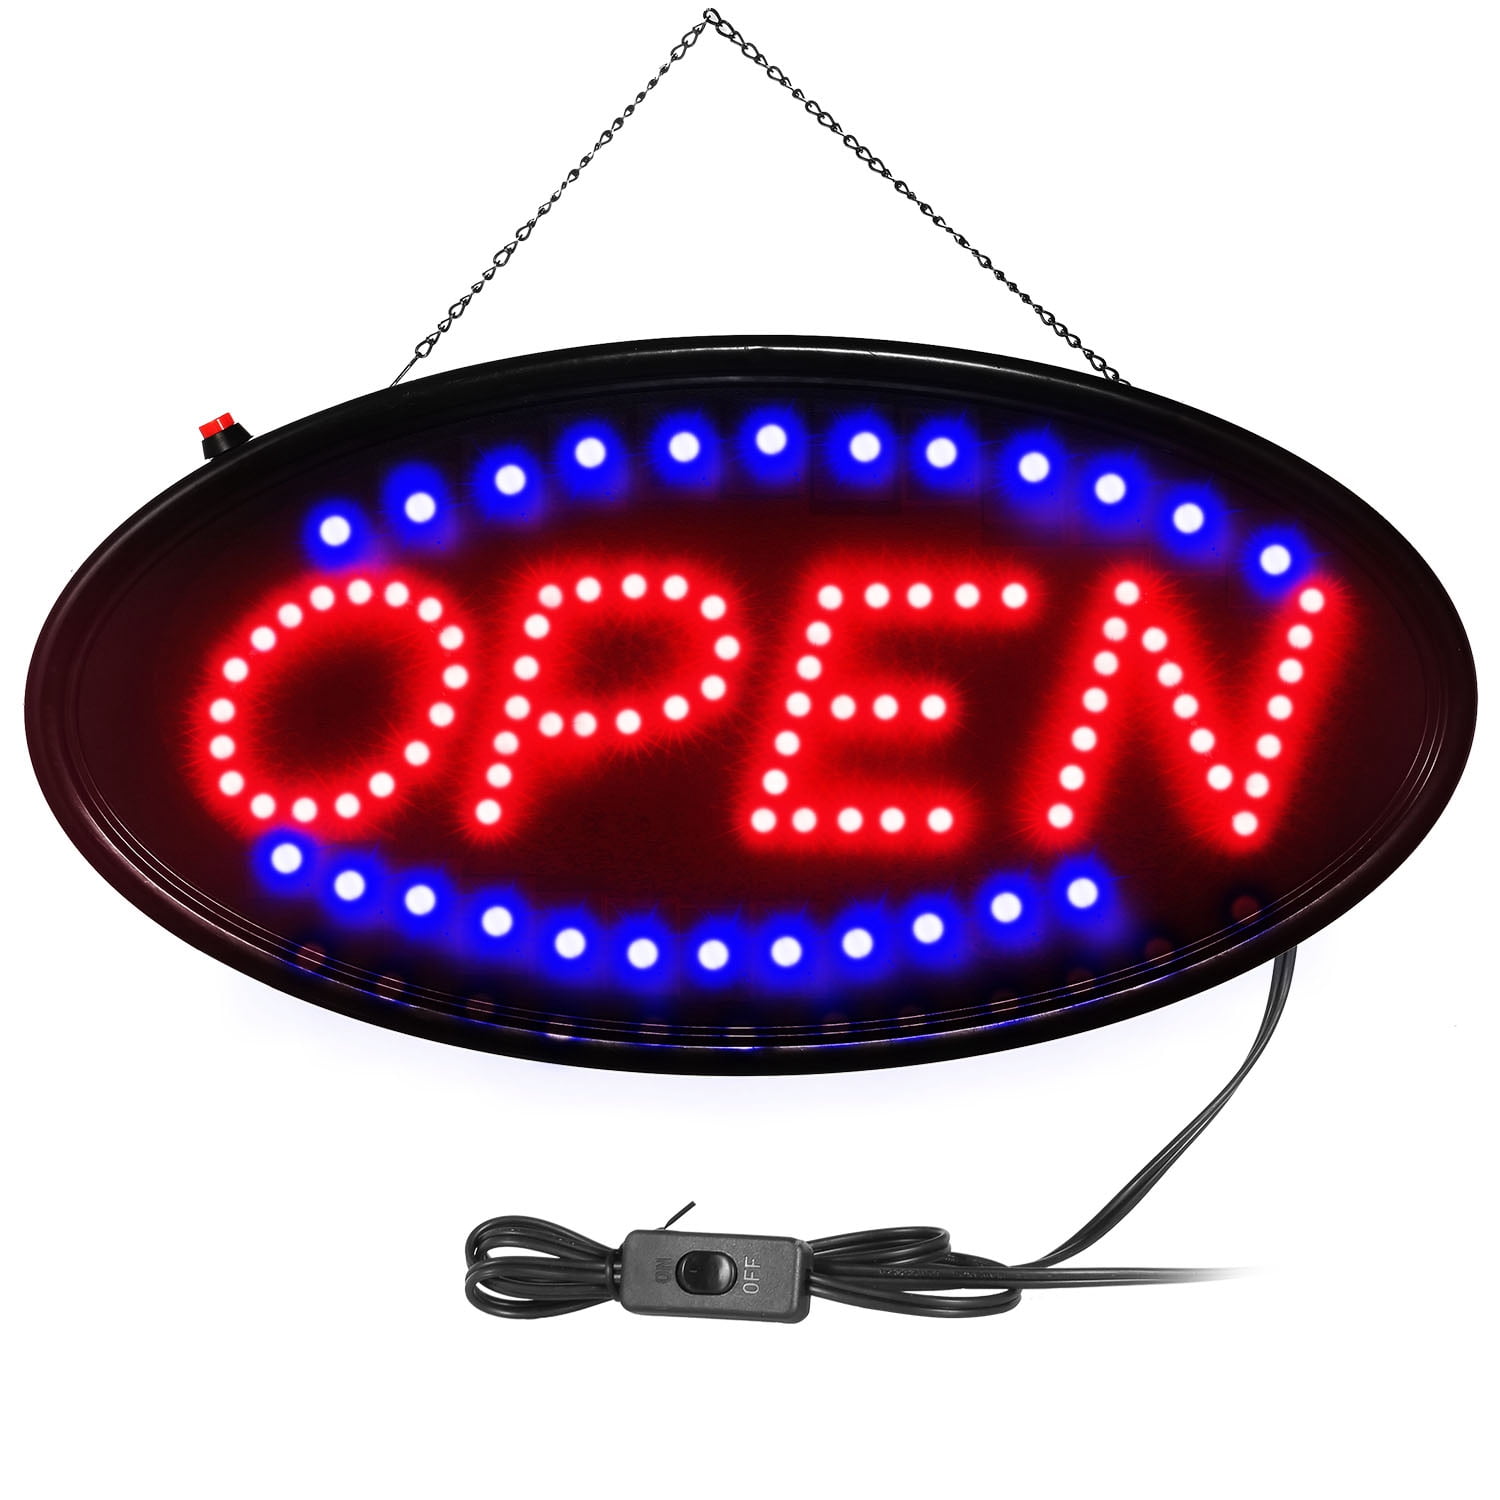 Bakery Neon Lights LED Animated Customers Attractive Sign size 19"W x 10" 